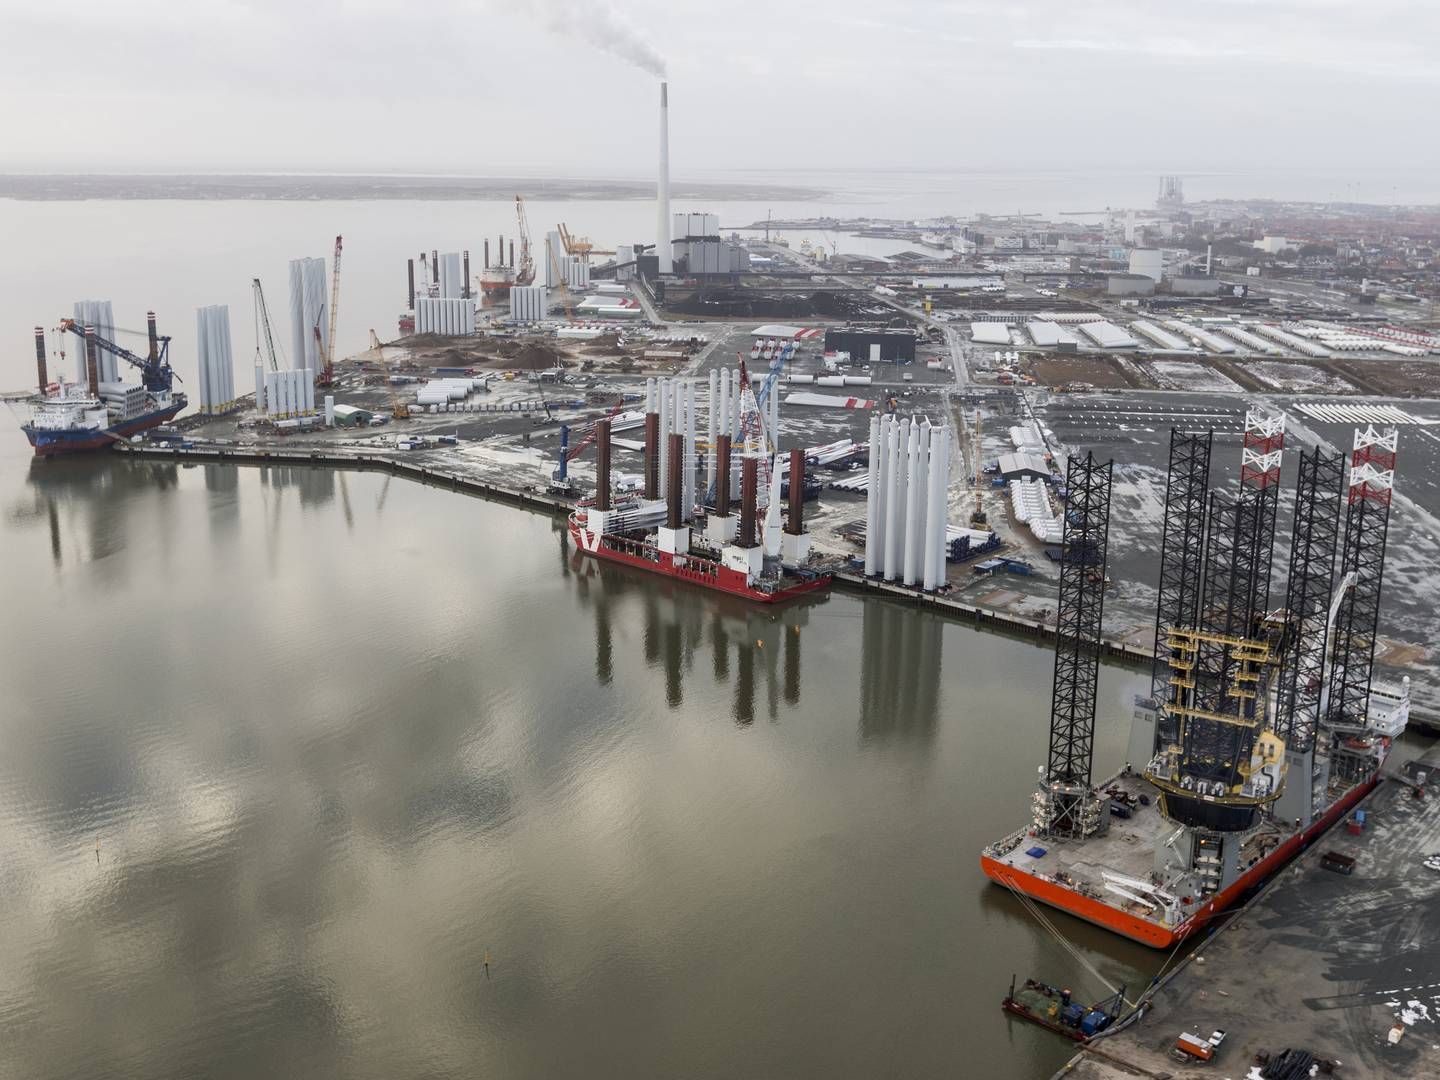 Since 2015, oil activities from the Port of Esbjerg have waned, but the present oil crisis seems to be halting them entirely, CEO says. | Photo: PR/Esbjerg Havn